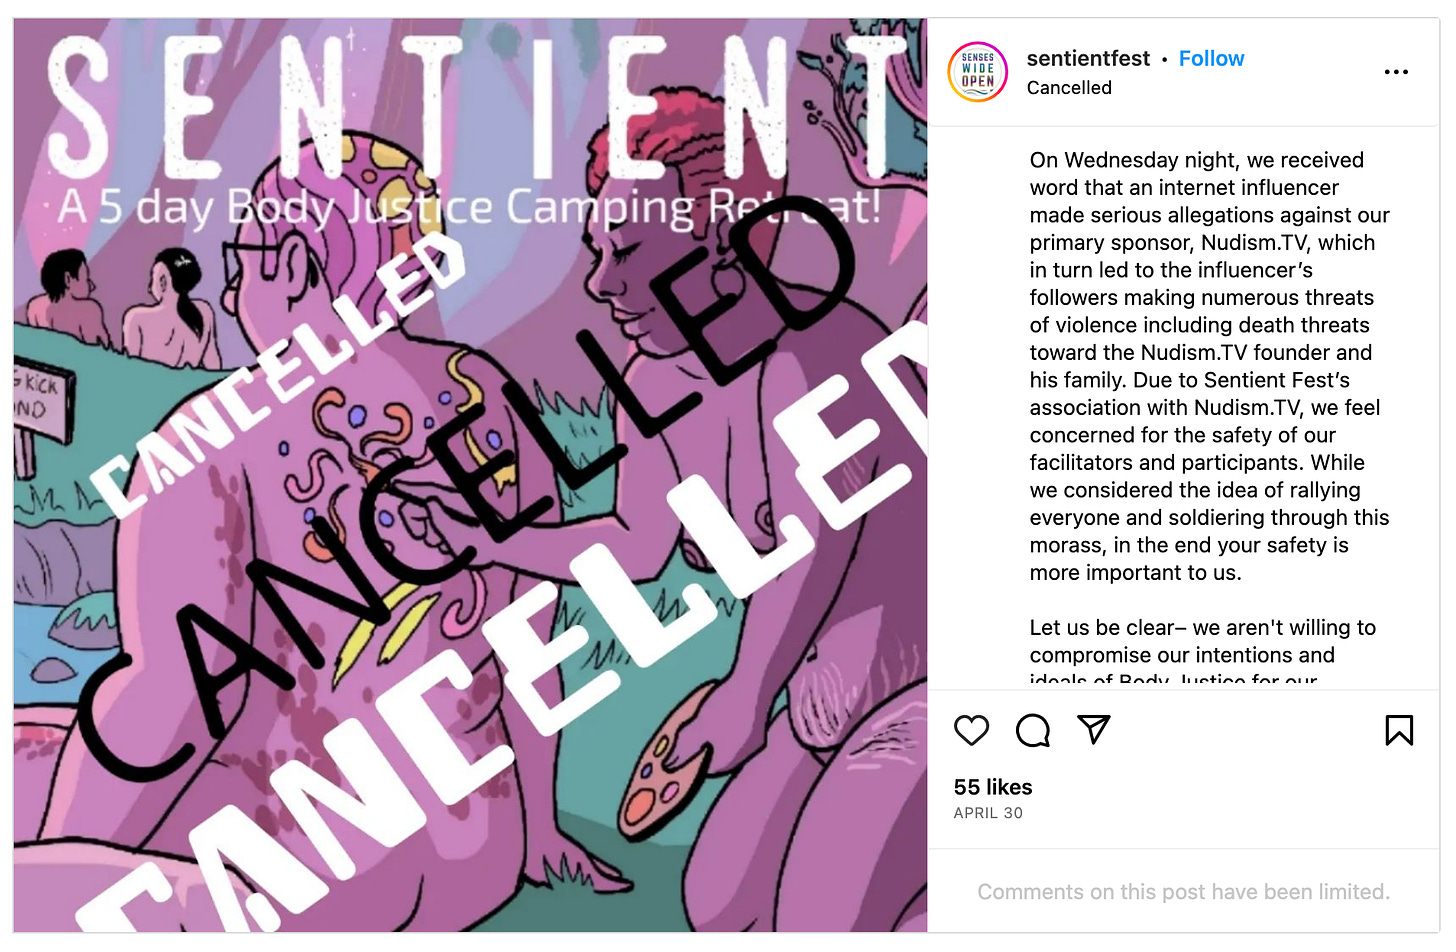 Screenshot of Sentient Fest's instagram post with the announcement: "On Wednesday night, we received word that an internet influencer made serious allegations against our primary sponsor, Nudism.TV, which in turn led to the influencer's followers making numerous threats of violence including death threats toward the Nudism.TV founder and his family. Due to Sentient Fest's association with Nudism.TV, we feel concerned for the safety of our facilitators and participants. While we considered the idea of rallying everyone and soldiering through this morass, in the end your safety is more important to us."